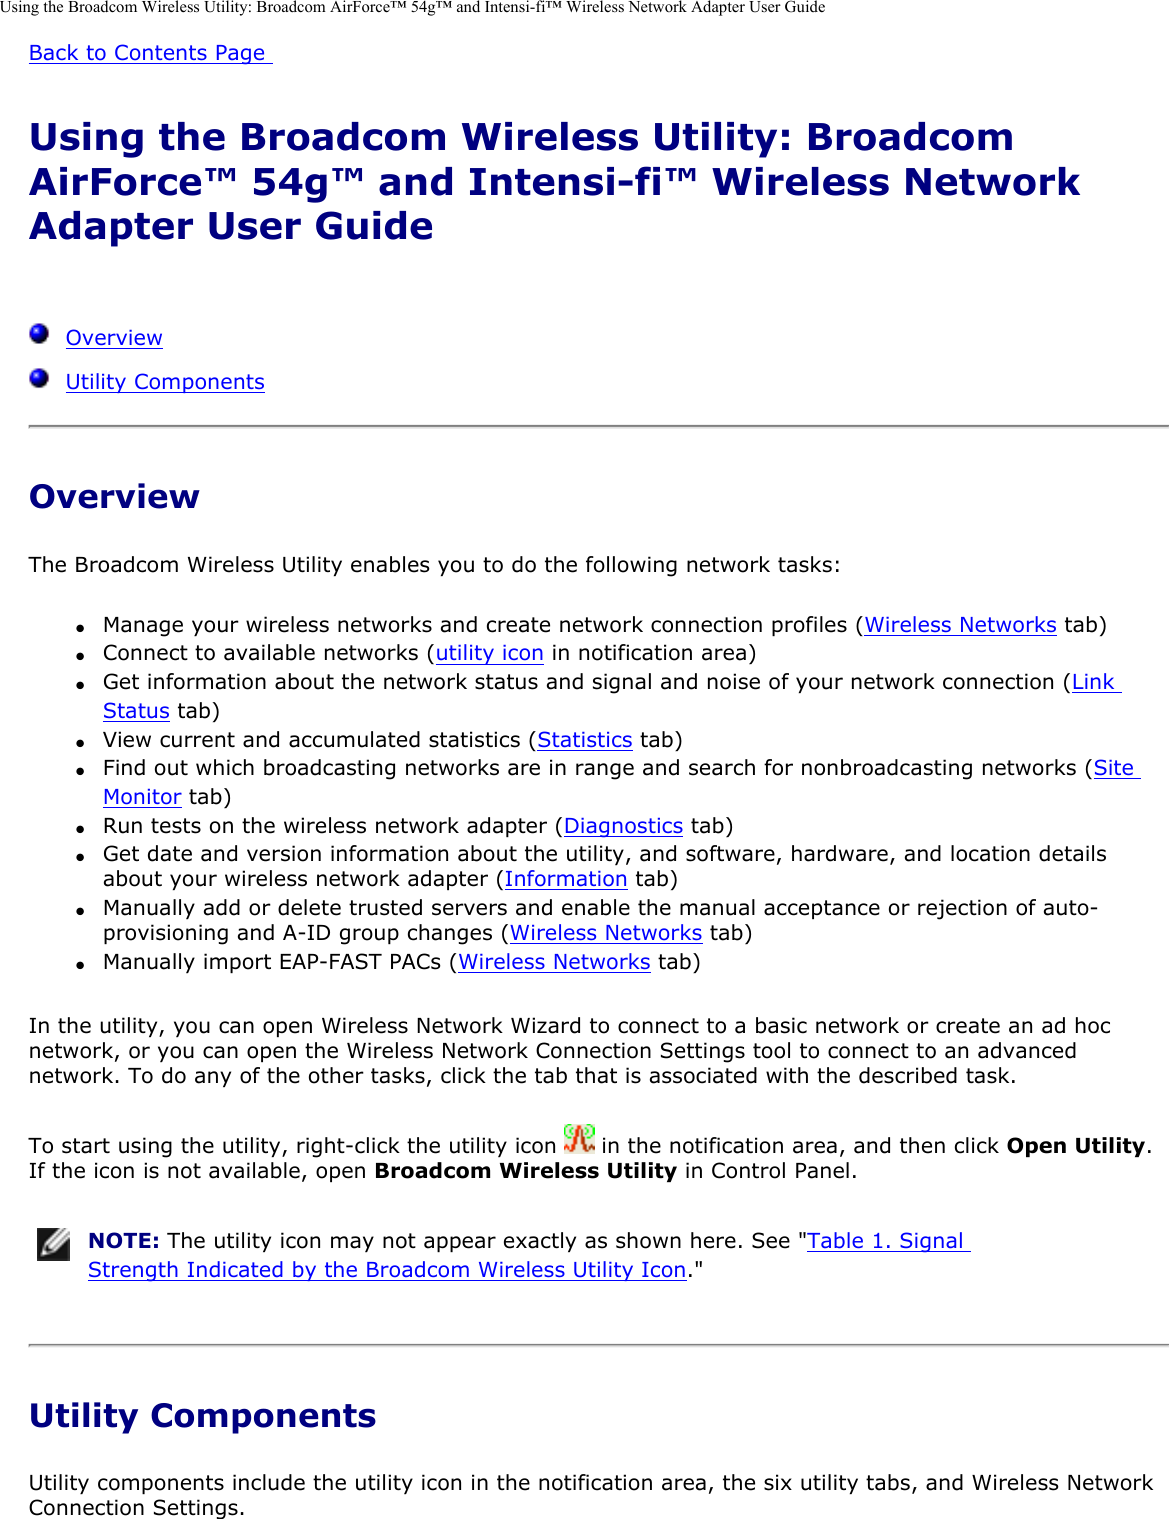 Using the Broadcom Wireless Utility: Broadcom AirForce™ 54g™ and Intensi-fi™ Wireless Network Adapter User GuideBack to Contents Page Using the Broadcom Wireless Utility: Broadcom AirForce™ 54g™ and Intensi-fi™ Wireless Network Adapter User Guide   Overview  Utility ComponentsOverviewThe Broadcom Wireless Utility enables you to do the following network tasks: ●     Manage your wireless networks and create network connection profiles (Wireless Networks tab) ●     Connect to available networks (utility icon in notification area) ●     Get information about the network status and signal and noise of your network connection (Link Status tab) ●     View current and accumulated statistics (Statistics tab) ●     Find out which broadcasting networks are in range and search for nonbroadcasting networks (Site Monitor tab) ●     Run tests on the wireless network adapter (Diagnostics tab) ●     Get date and version information about the utility, and software, hardware, and location details about your wireless network adapter (Information tab) ●     Manually add or delete trusted servers and enable the manual acceptance or rejection of auto-provisioning and A-ID group changes (Wireless Networks tab) ●     Manually import EAP-FAST PACs (Wireless Networks tab) In the utility, you can open Wireless Network Wizard to connect to a basic network or create an ad hoc network, or you can open the Wireless Network Connection Settings tool to connect to an advanced network. To do any of the other tasks, click the tab that is associated with the described task. To start using the utility, right-click the utility icon   in the notification area, and then click Open Utility. If the icon is not available, open Broadcom Wireless Utility in Control Panel.  NOTE: The utility icon may not appear exactly as shown here. See &quot;Table 1. Signal Strength Indicated by the Broadcom Wireless Utility Icon.&quot; Utility ComponentsUtility components include the utility icon in the notification area, the six utility tabs, and Wireless Network Connection Settings. 